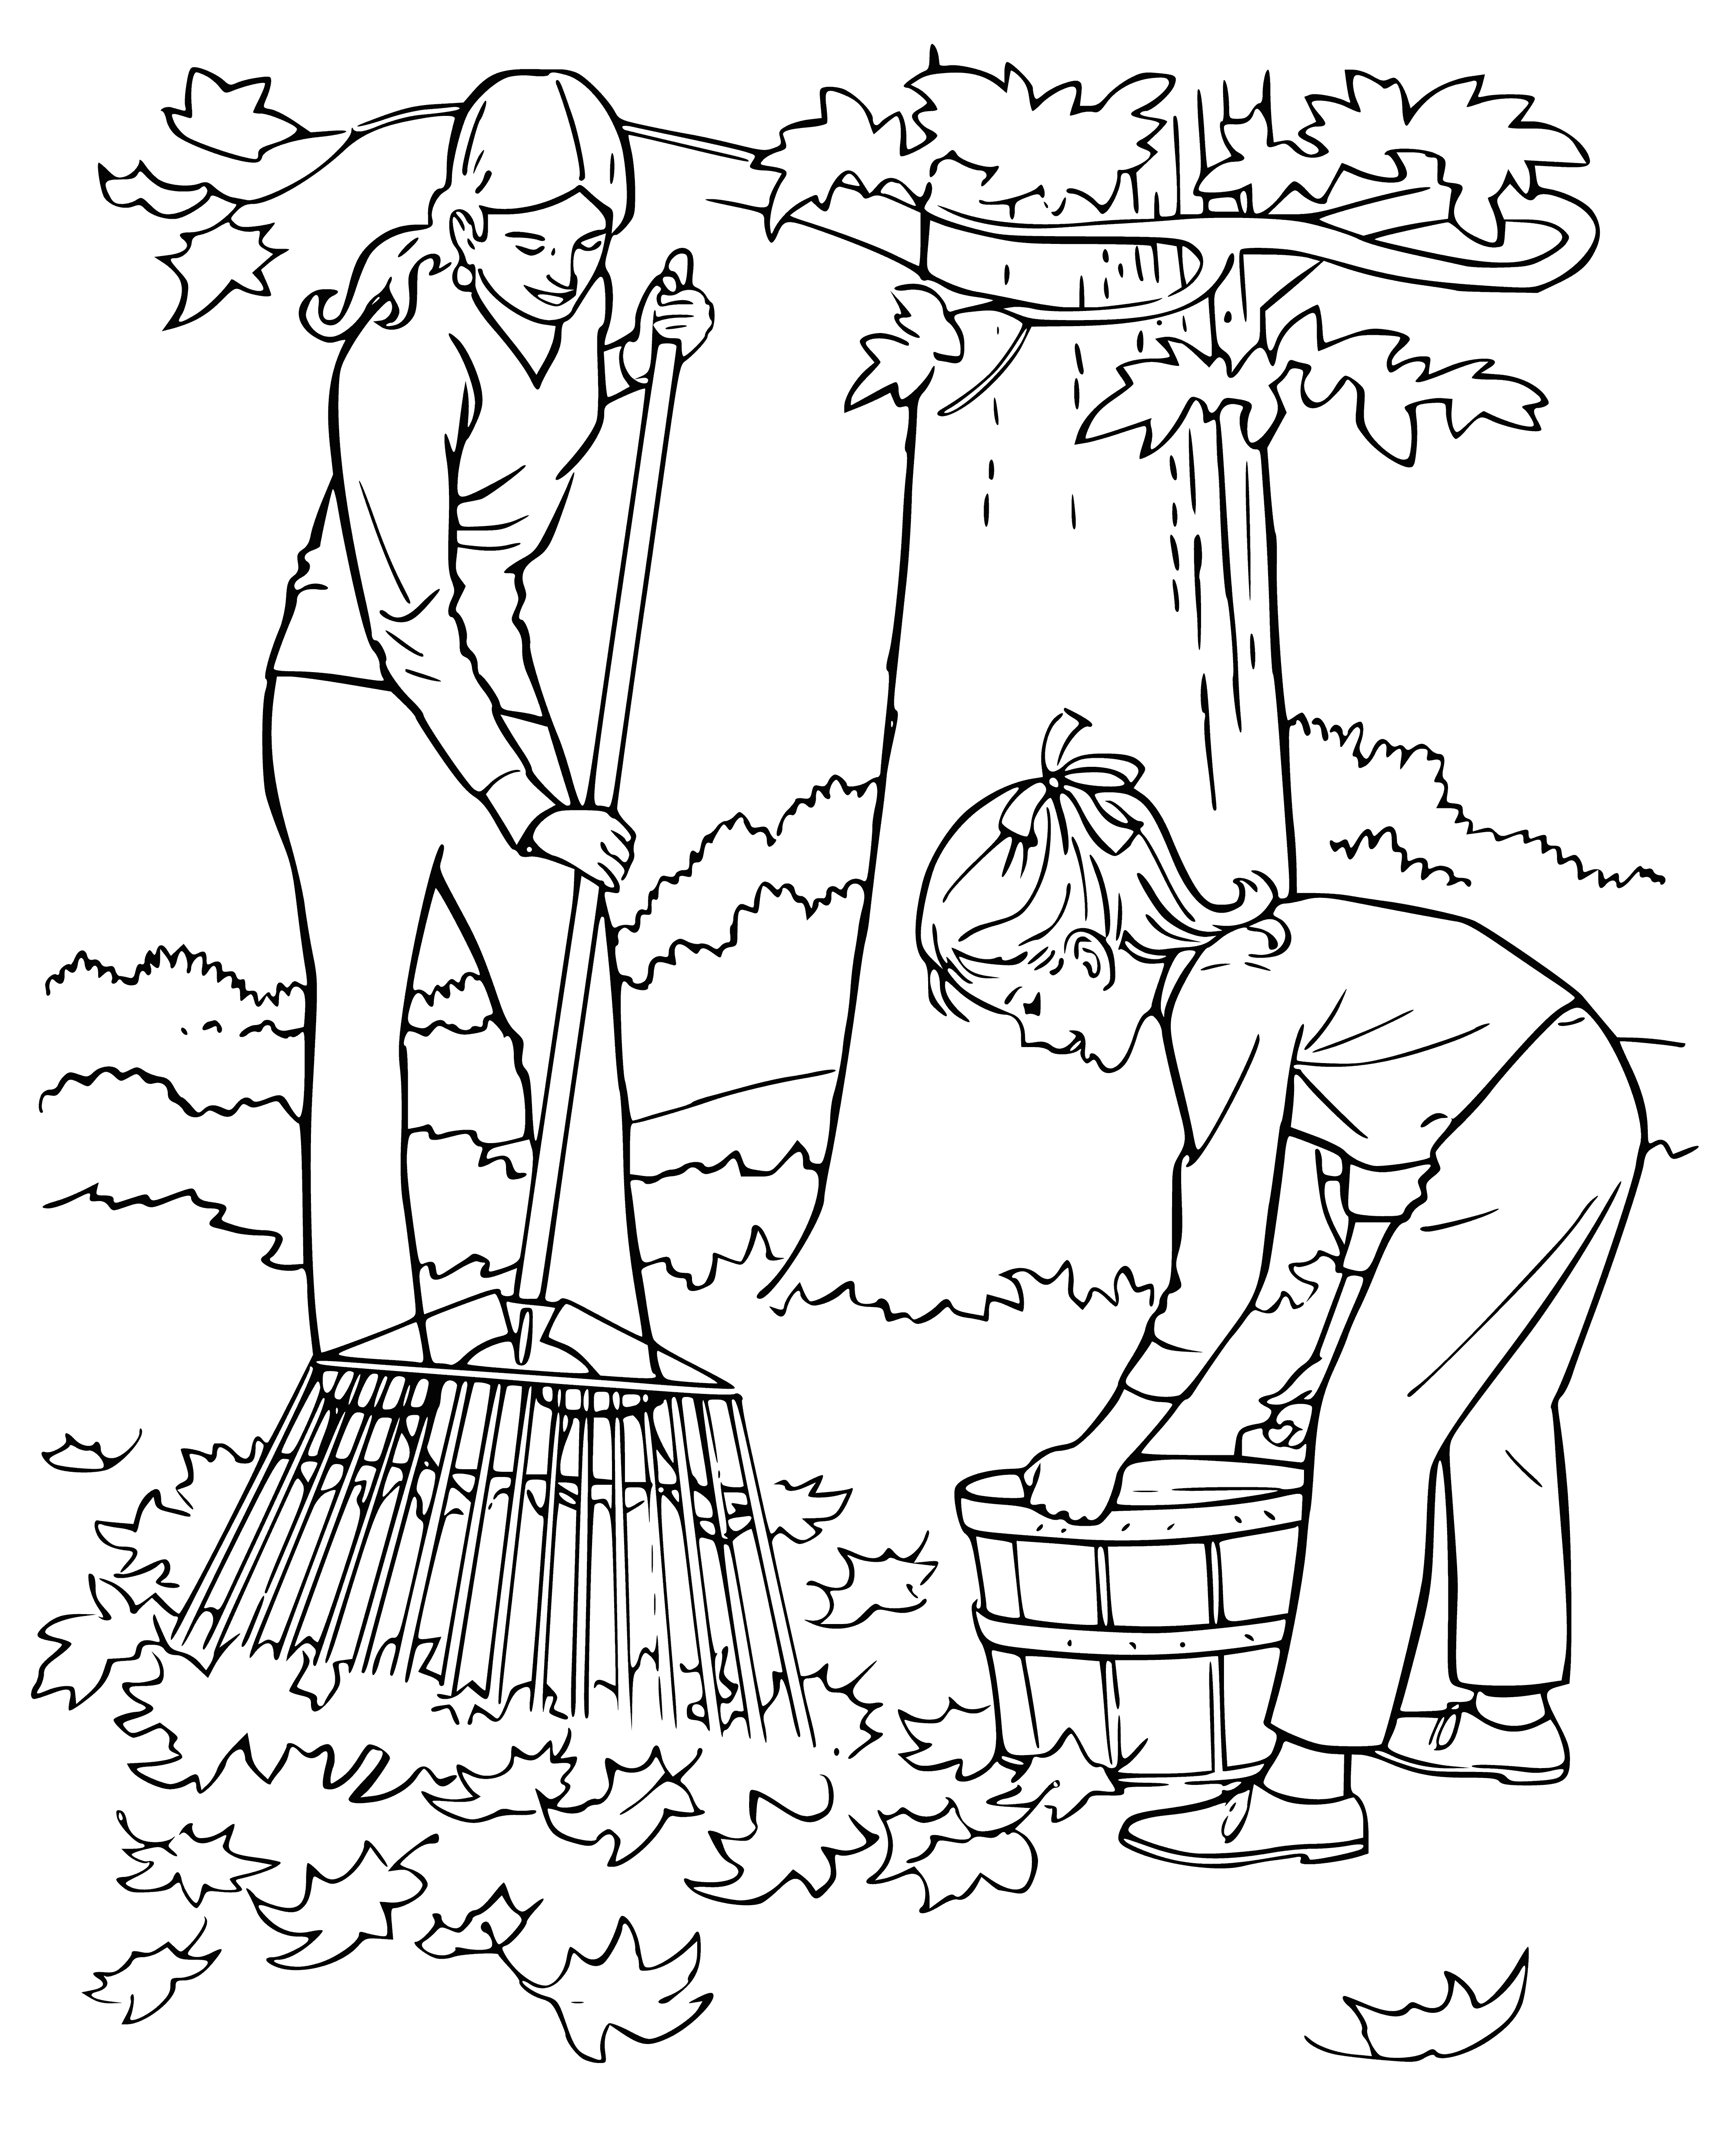 Cleaning fallen leaves coloring page